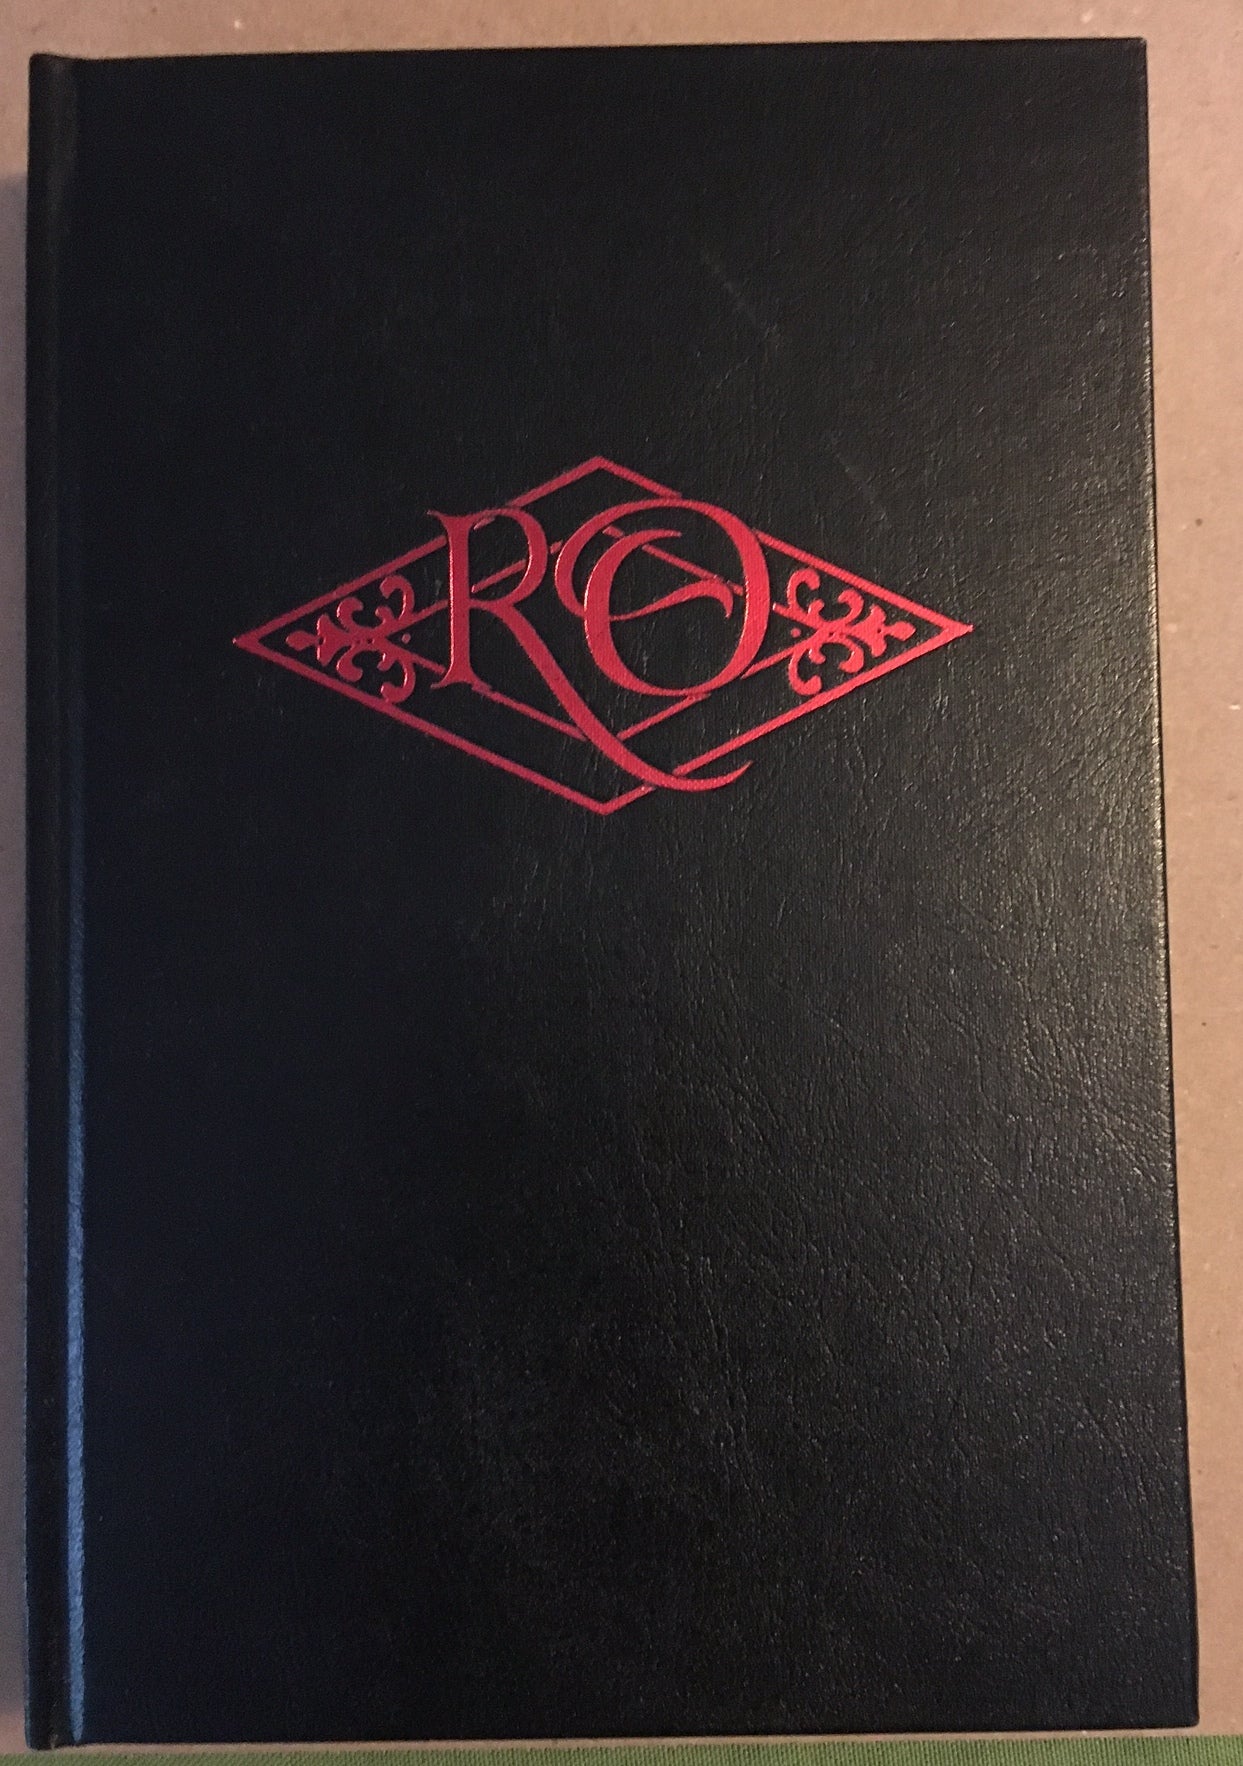 Sea Of Blood by Reggie Oliver (Signed/Limited PC HC - Dark Renaissance)